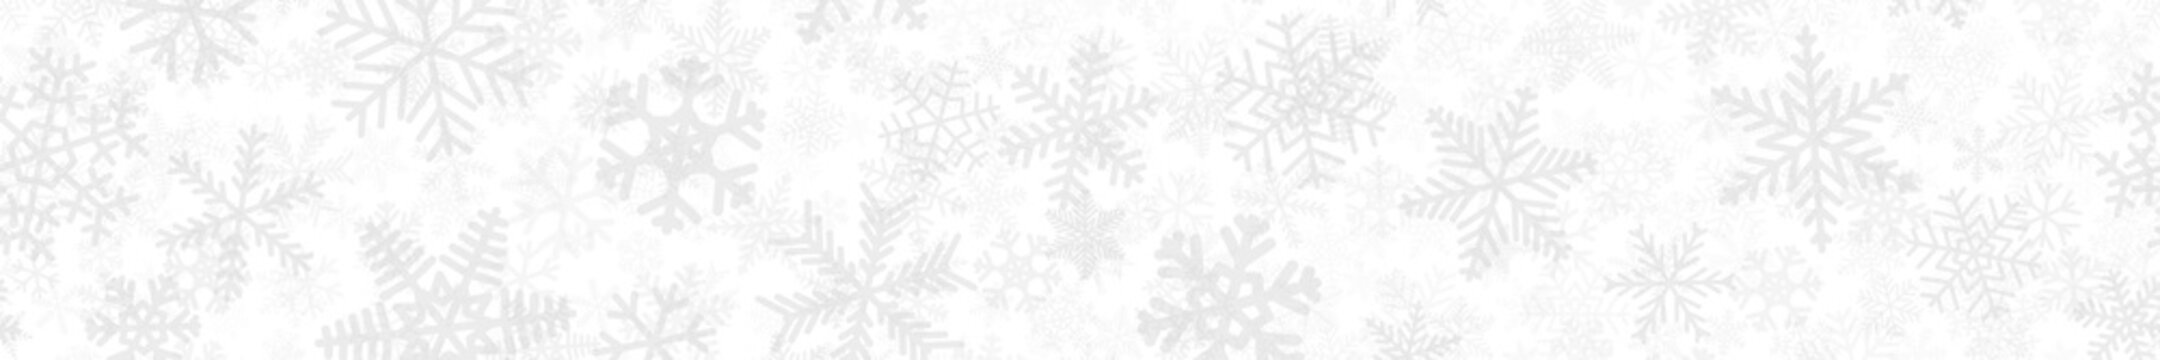 Christmas horizontal seamless banner of many layers of snowflakes of different shapes, sizes and transparency. Light gray on white © Aleksei Solovev